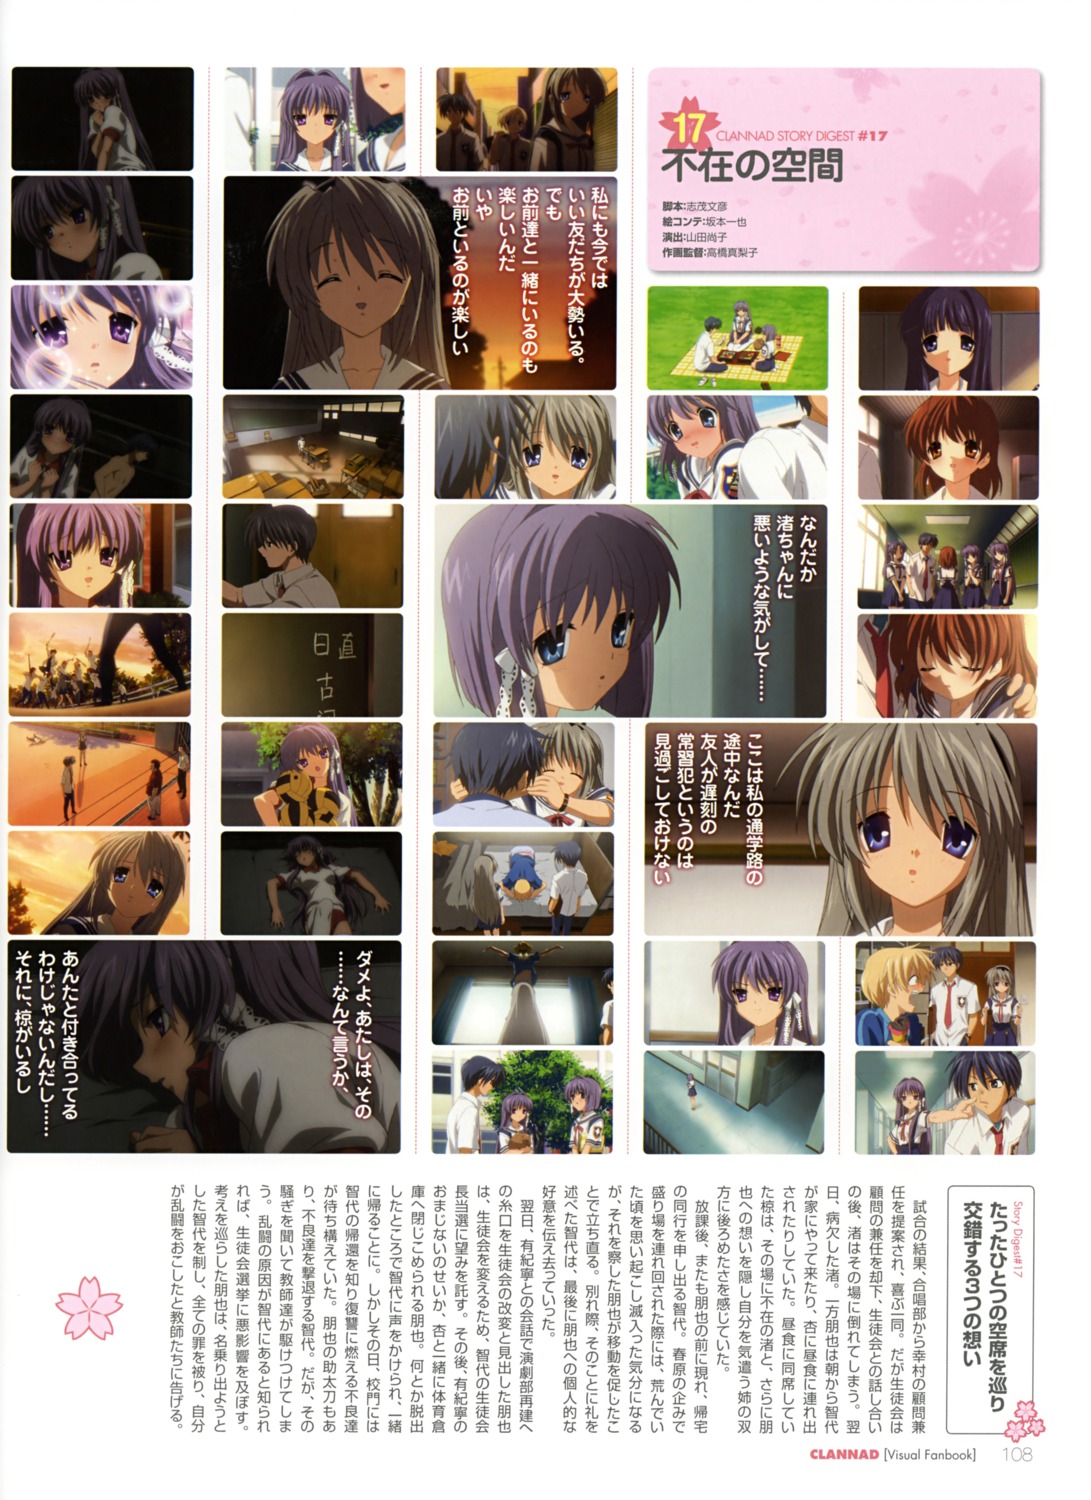 Clannad After Story - Final Thoughts - AstroNerdBoy's Anime & Manga Blog